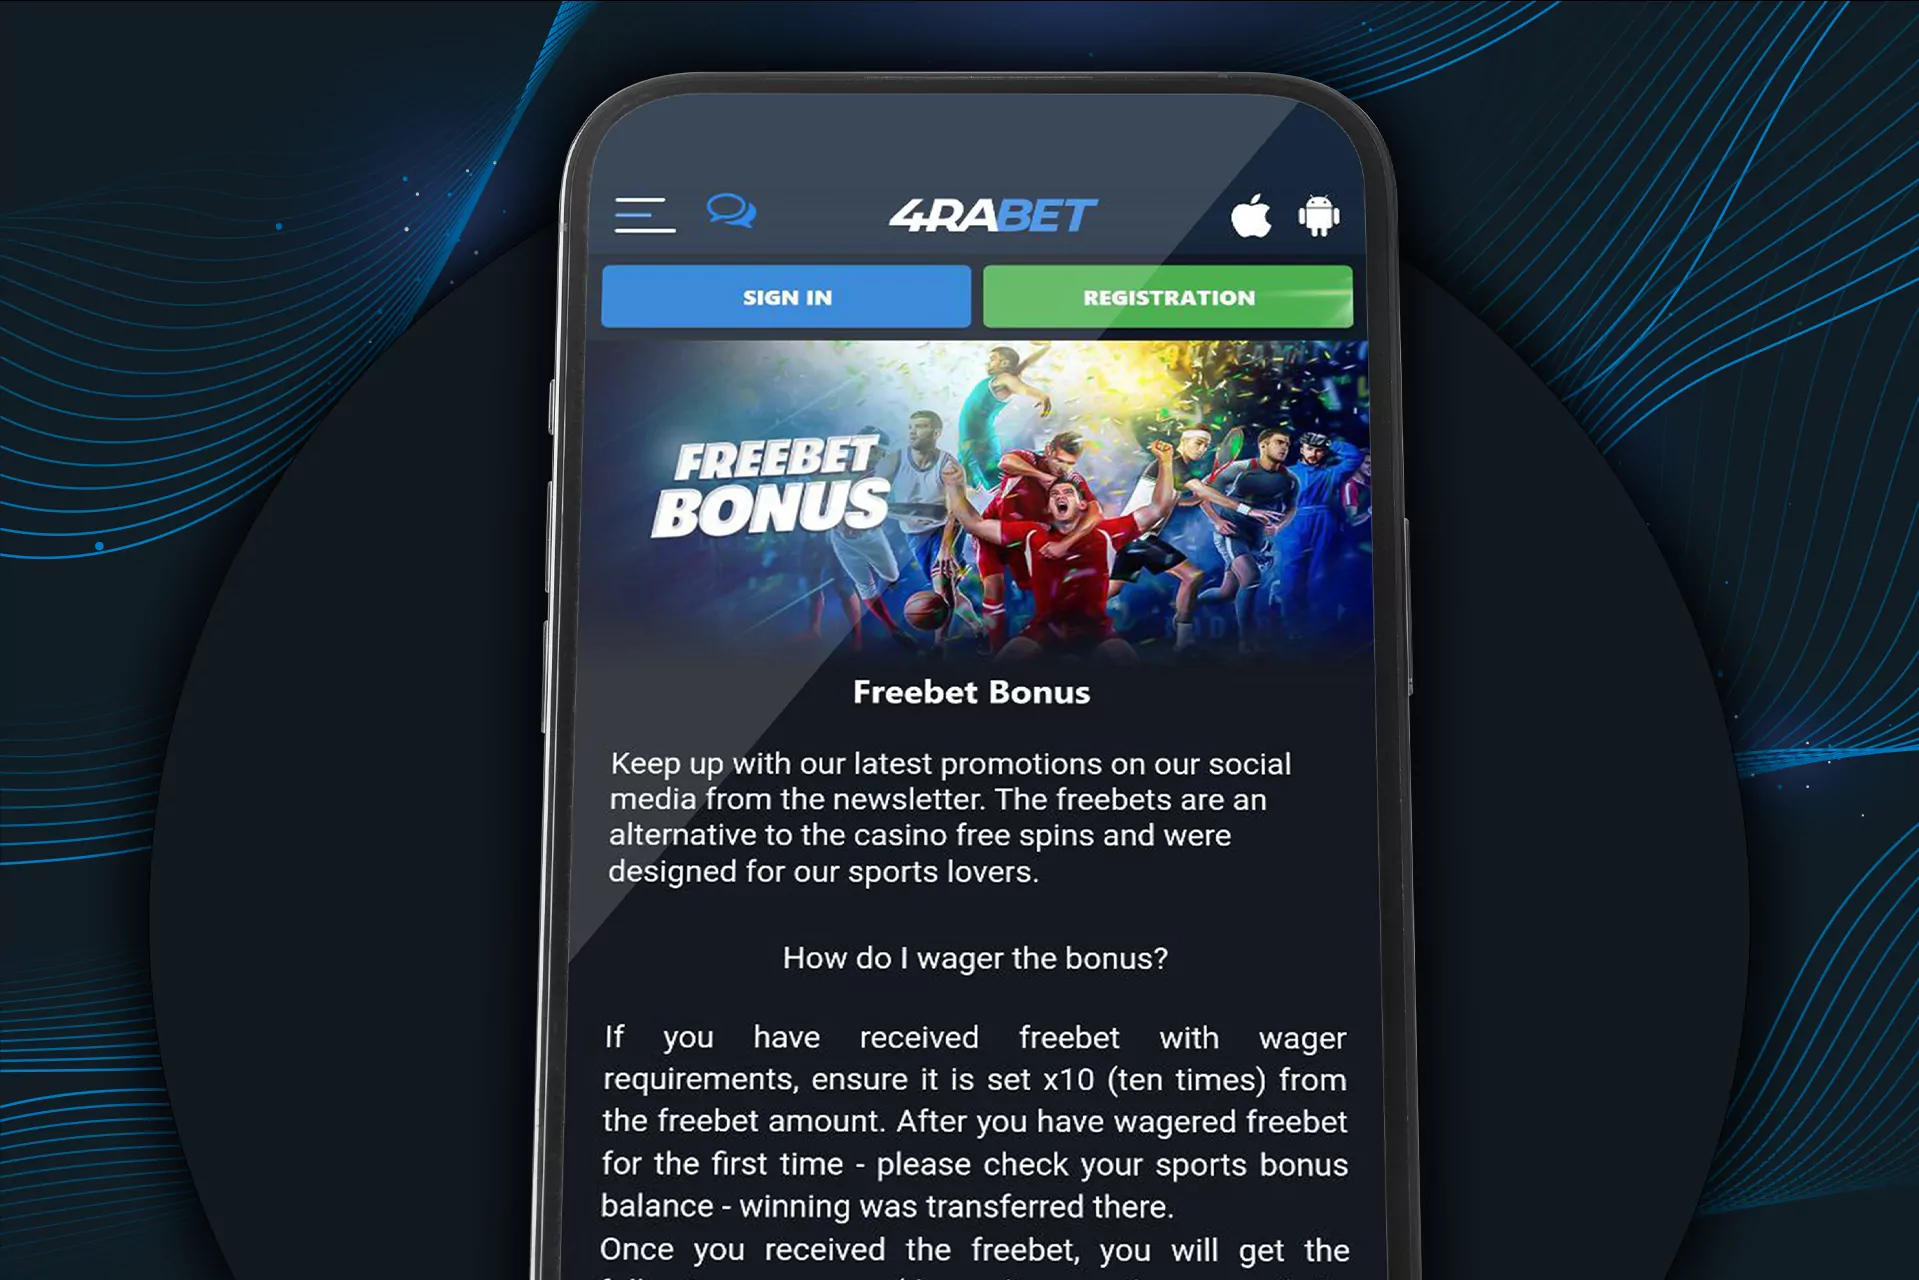 The free bet bonus applies to all betting events available at the time of use.